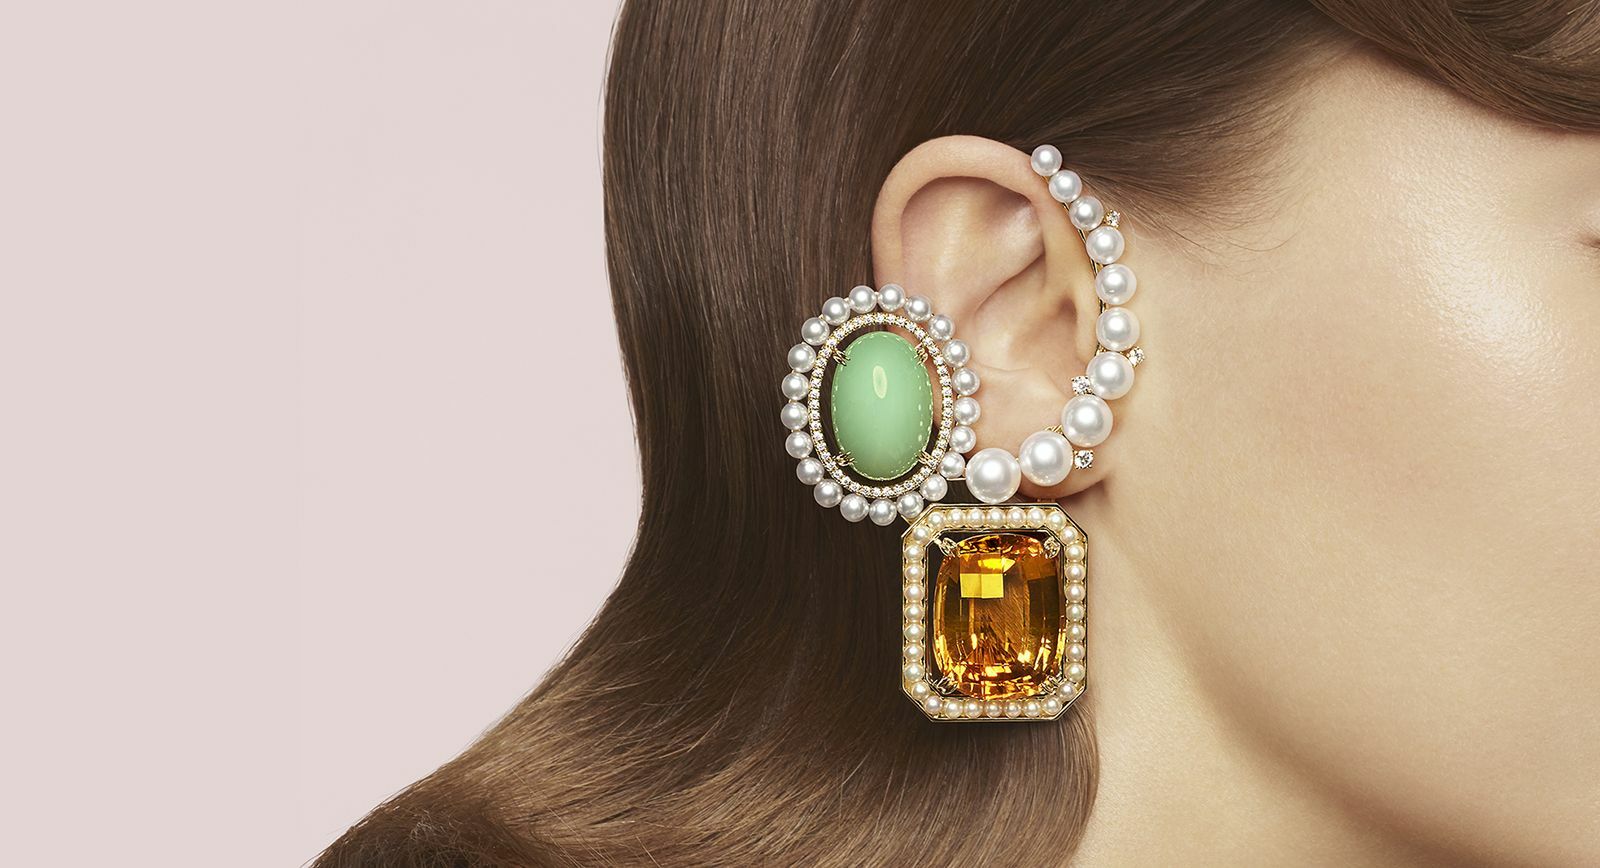 TASAKI Atelier Ore earring in yellow gold with Akoya pearls, South Sea pearls, diamonds, citrine and opal